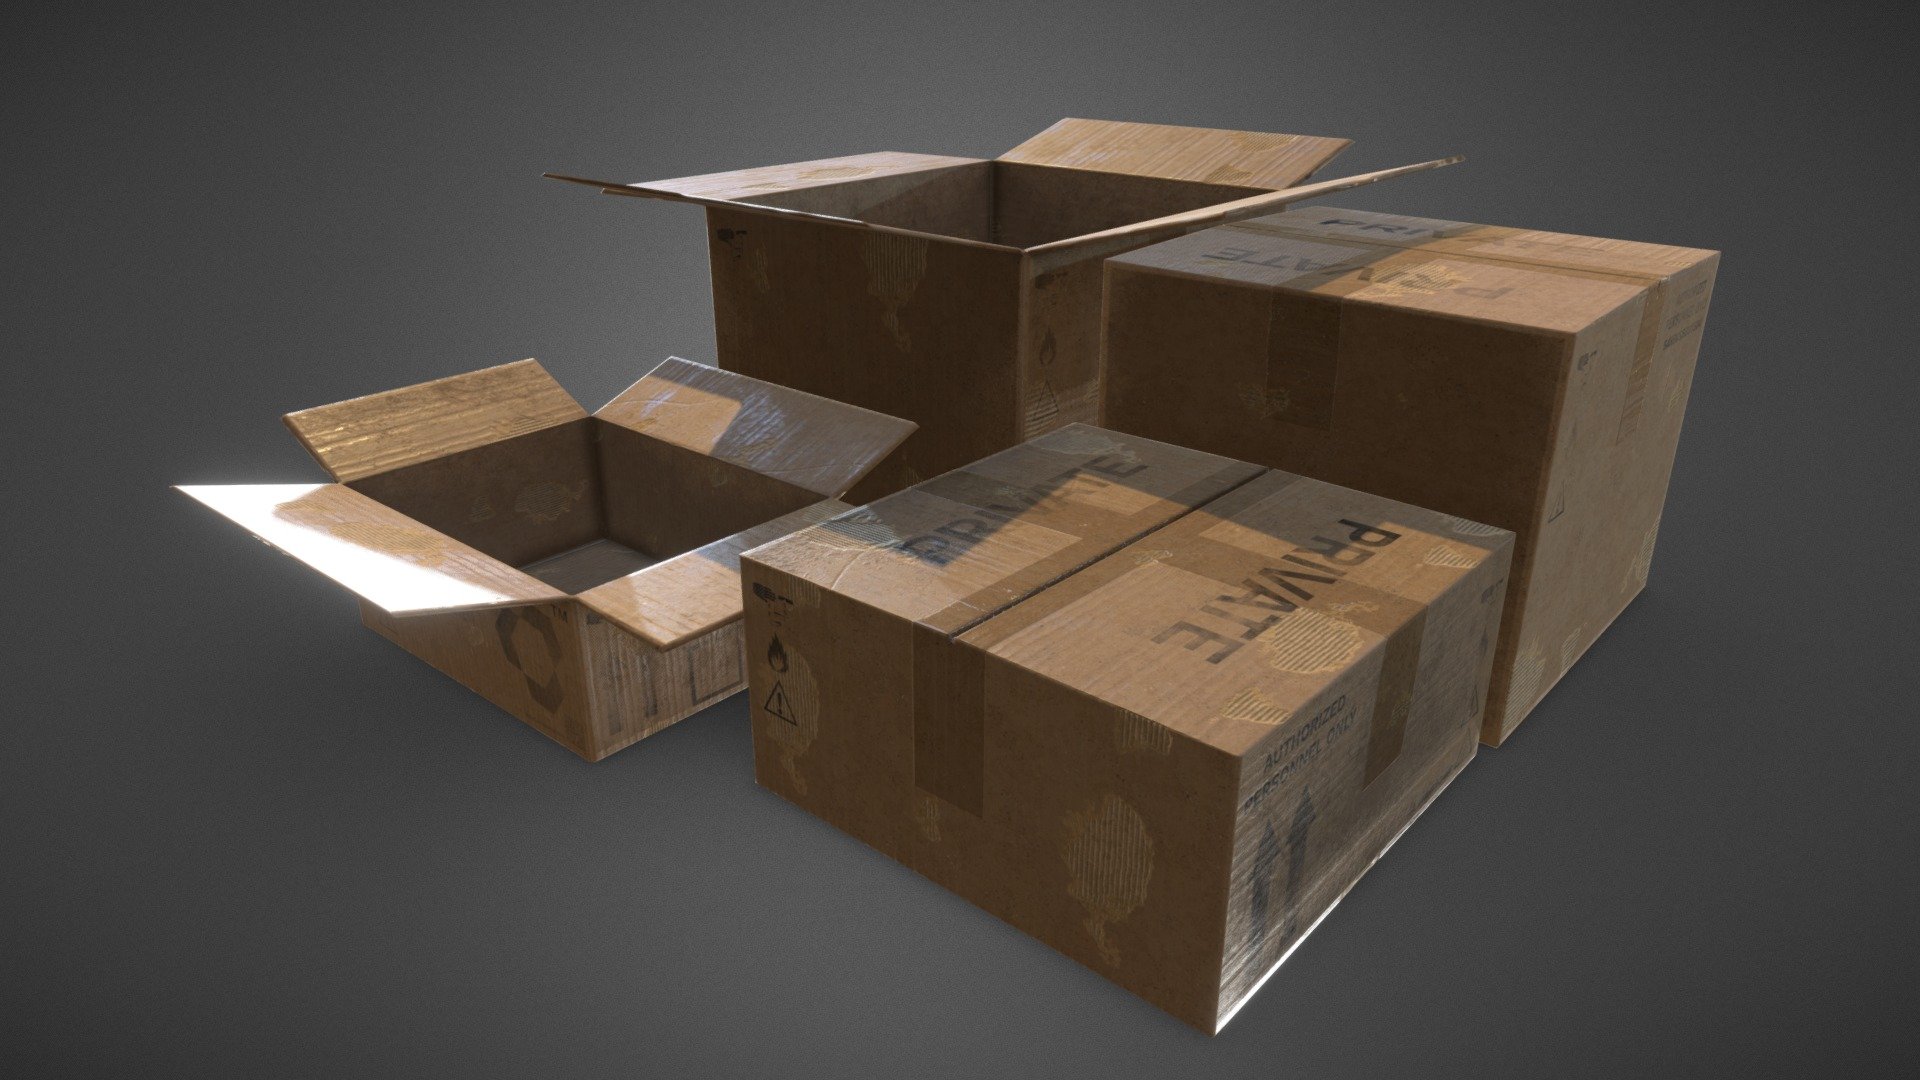 These are some 3d models of some storage cardboard boxes made to fill some space, there are 4 variations, two open boxes and two closed ones, as well as two big ones and two small ones, all made in blender and textured in substance painter, hope you like it! - Cardboard Boxes 3D models - 3D model by IPfuentes 3d model